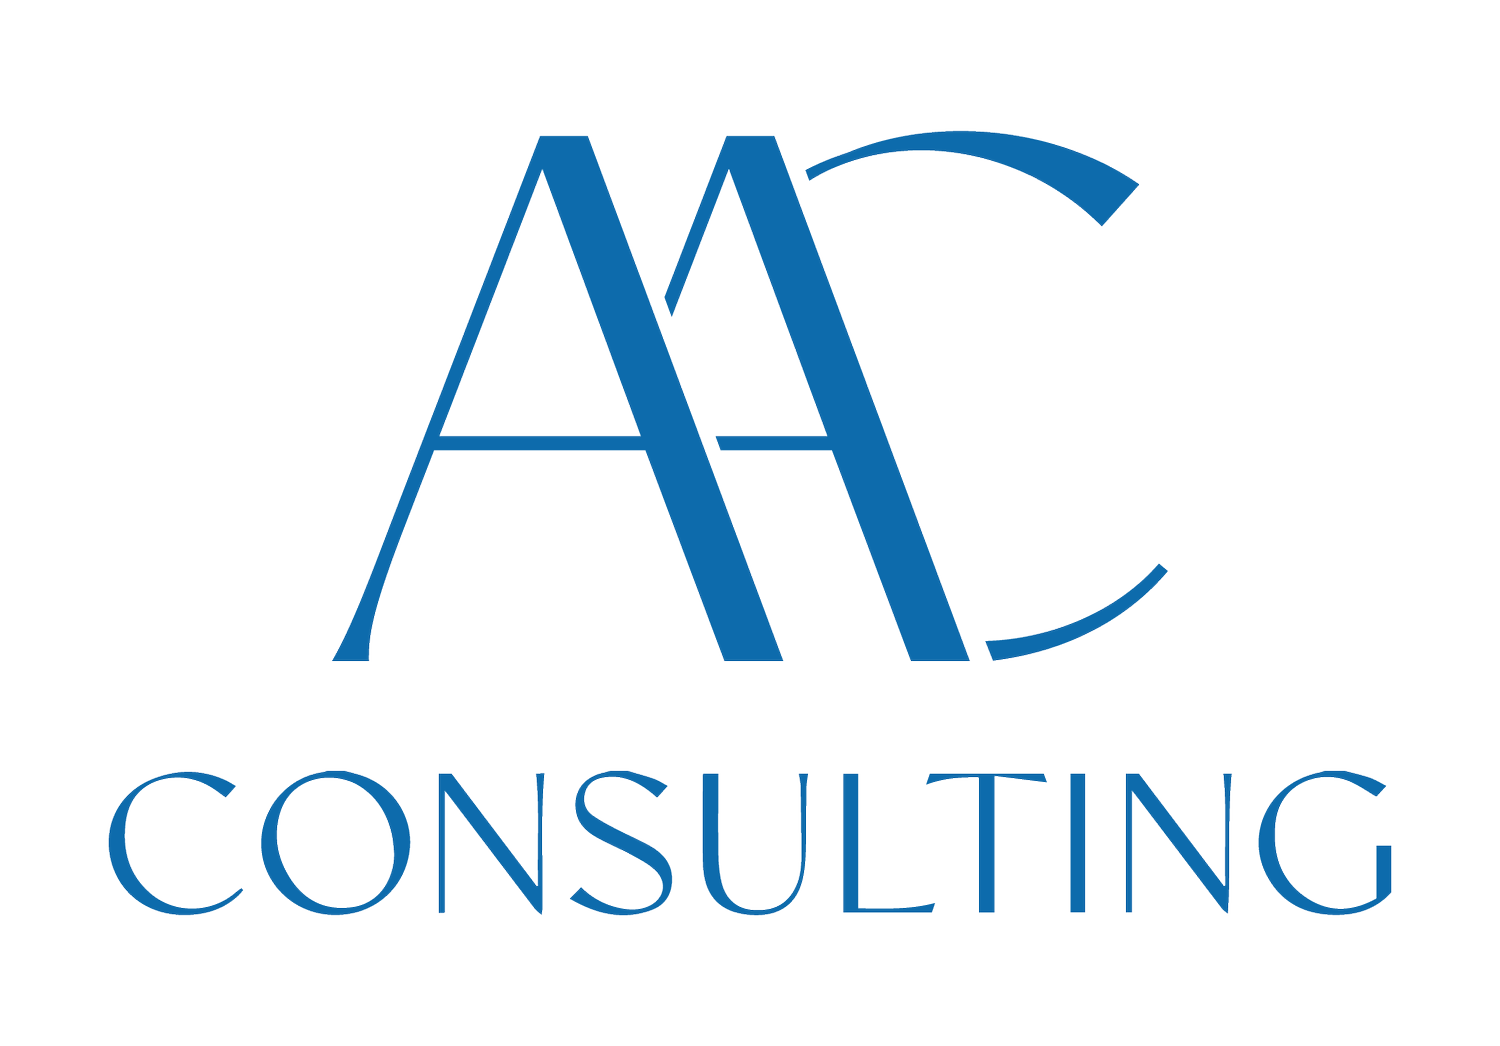 AAC Consulting